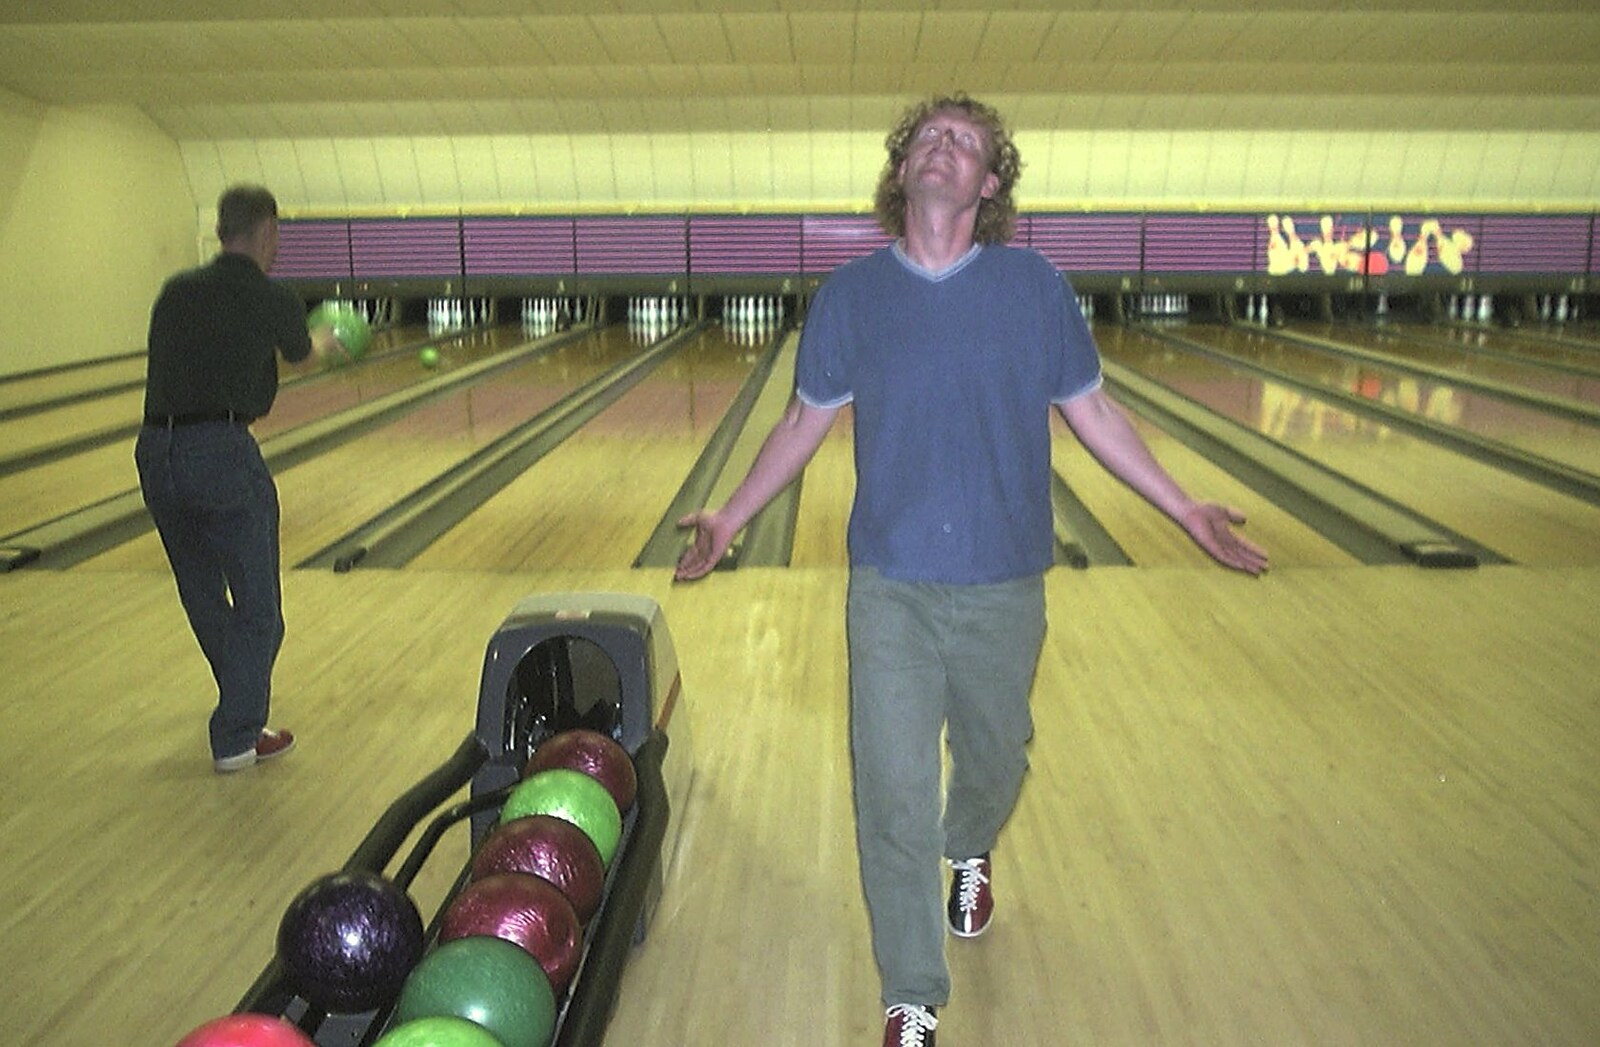 BSCC Bike Rides and Ten-Pin Bowling, Thornham and Norwich - 18th September 2004: Wavy despairs after missing a shot